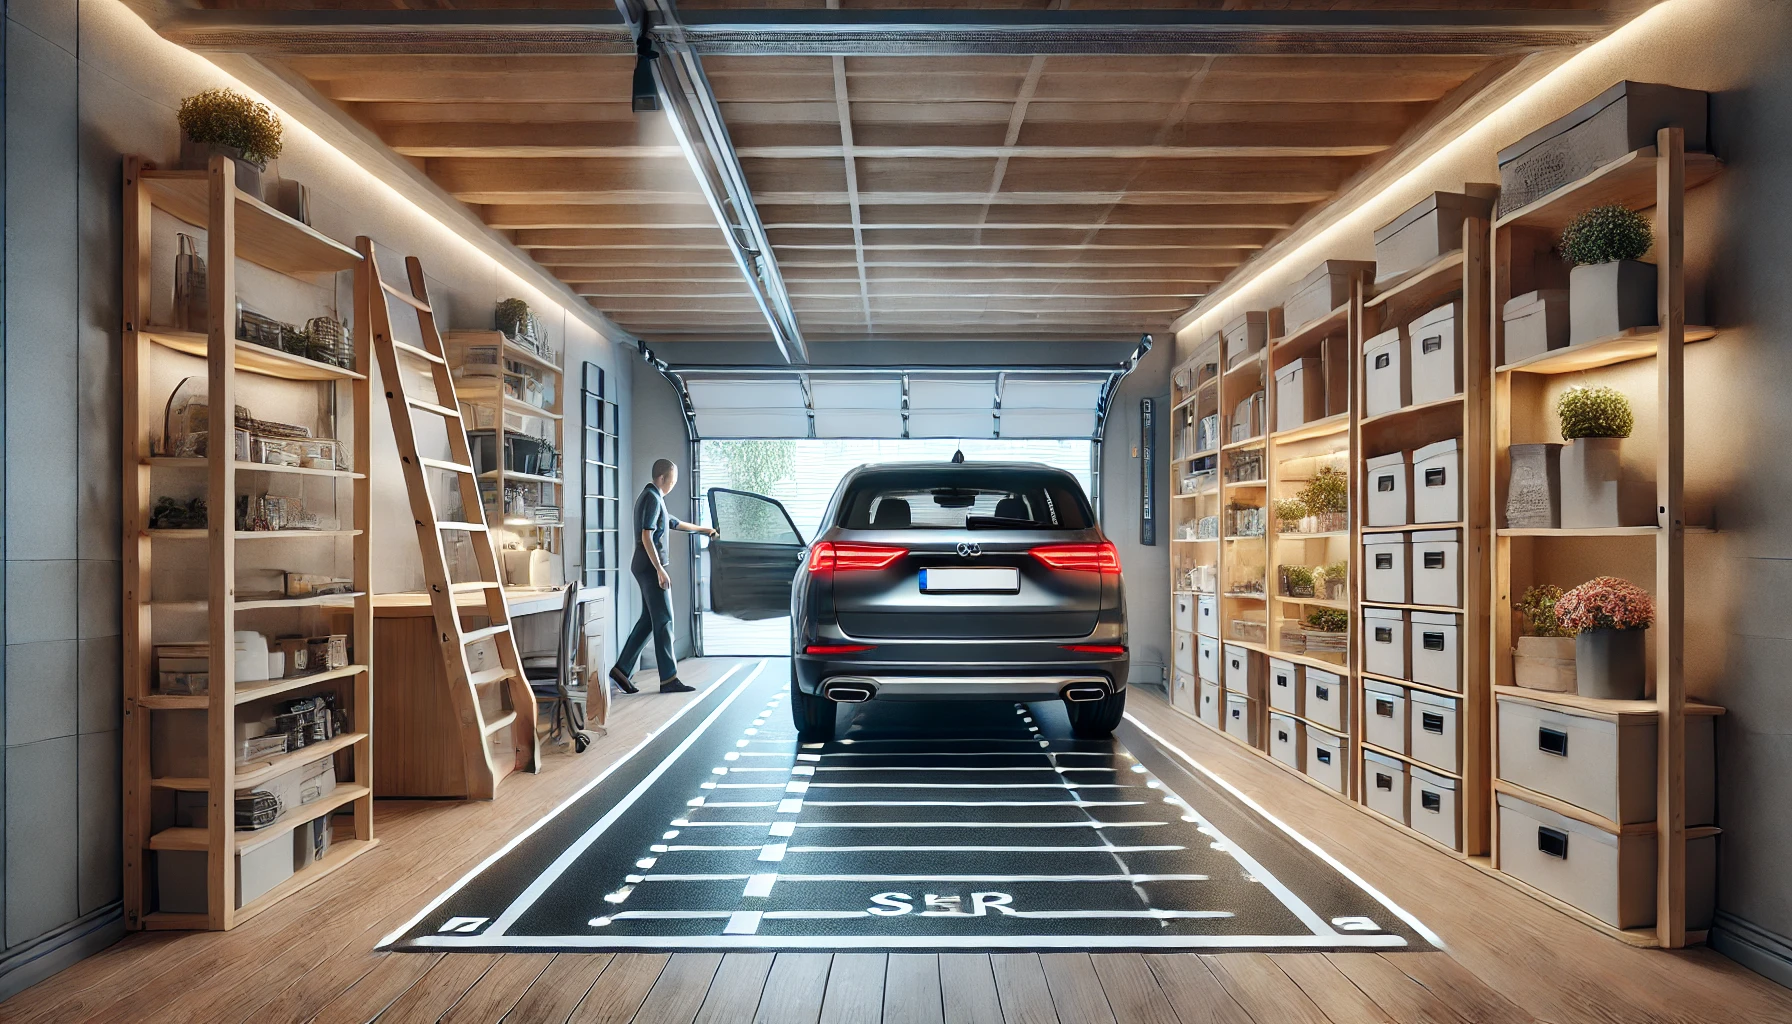 Organized garage with shelves, parked car, and a working person.